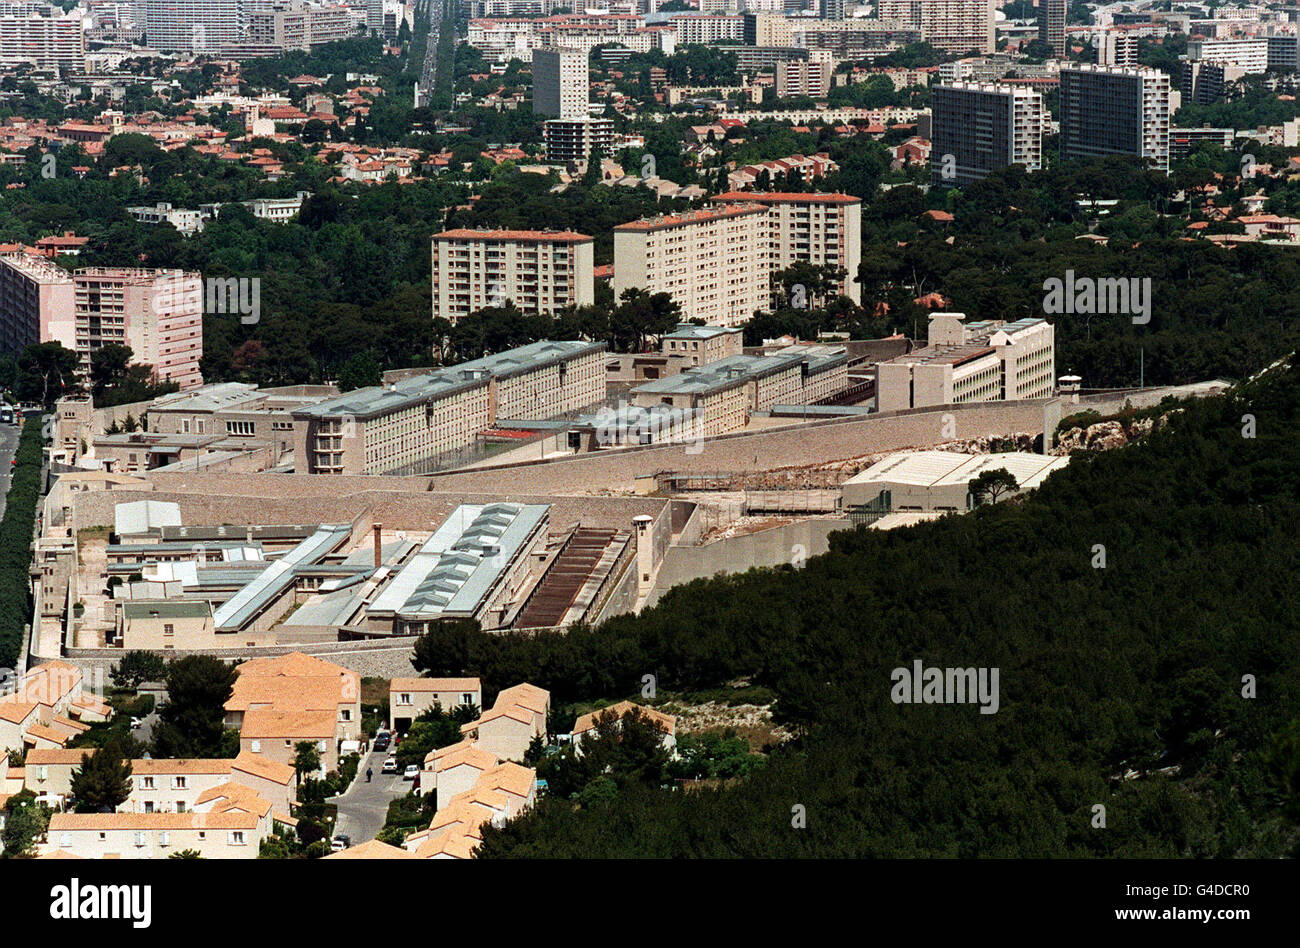 PA NEWS 17/6/98 LA BAUMETTE, IN THE SUBURBS OF MARSEILLE, A HIGH SECURITY JAIL NOTORIOUS FOR ITS TOUGH REGIME, SPARTAN CONDITIONS AND CHRONIC OVERCROWDING, WHERE ENGLAND FOOTBALL FANS WHO BROUGHT TERROR TO MARSEILLE WILL SERVE SENTENCES OF UP TO FOUR MONTHS. Stock Photo